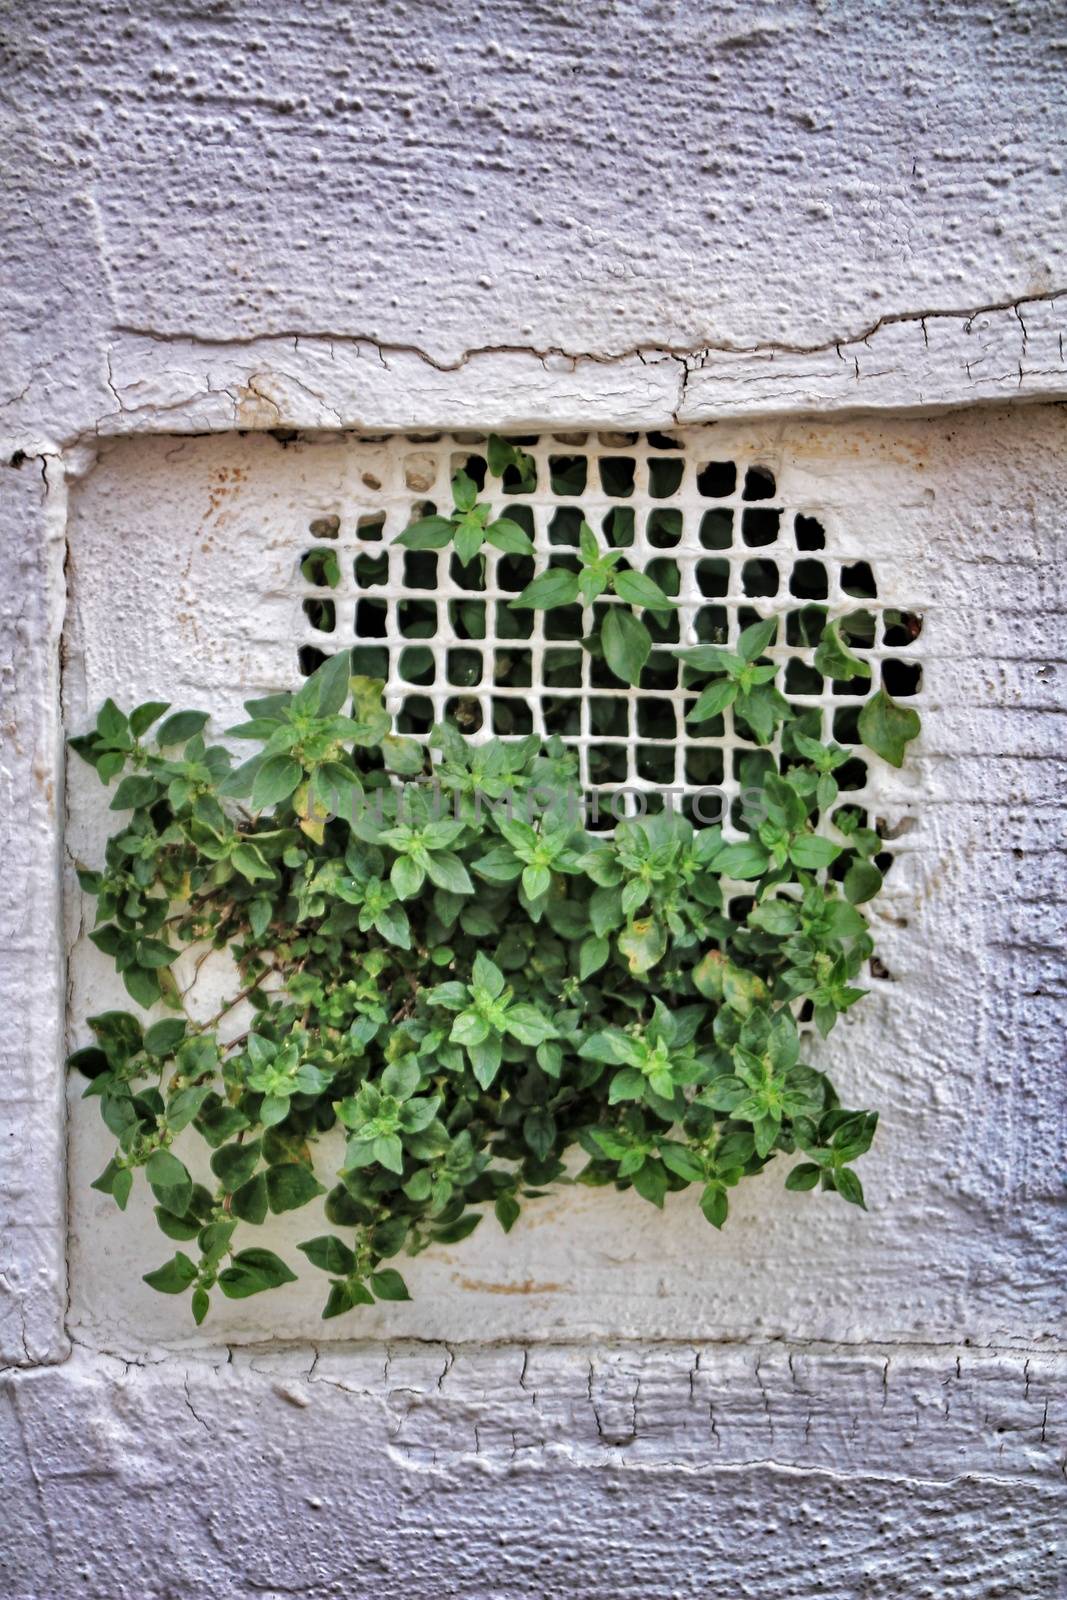 Green plant coming out of sewer. White background wall.